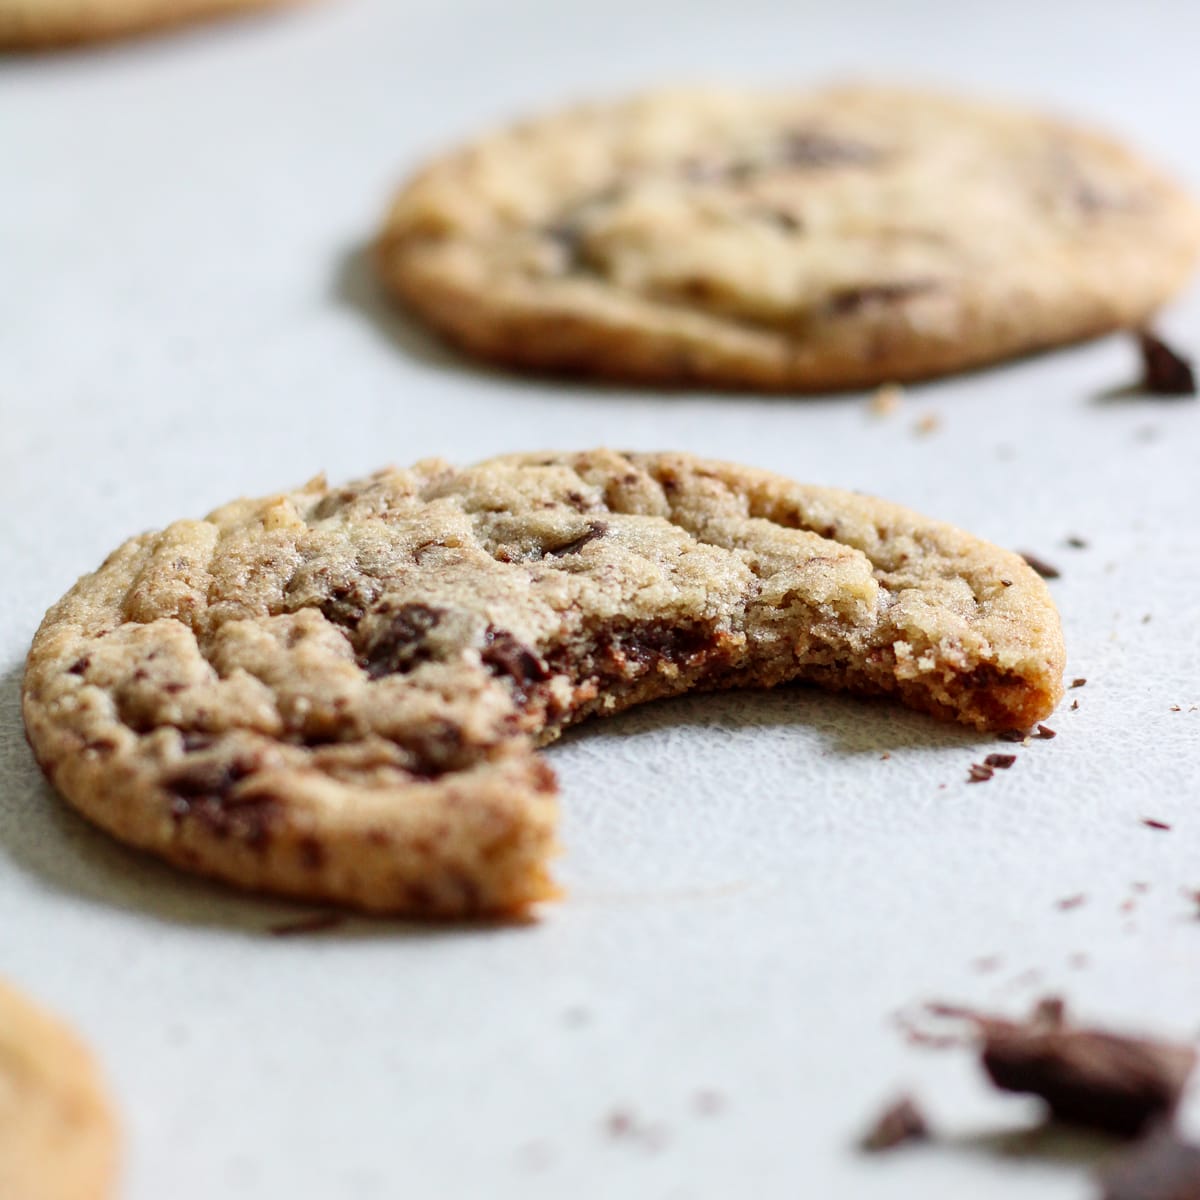 Sweet and salty chocolate chip cookie with a bite out.